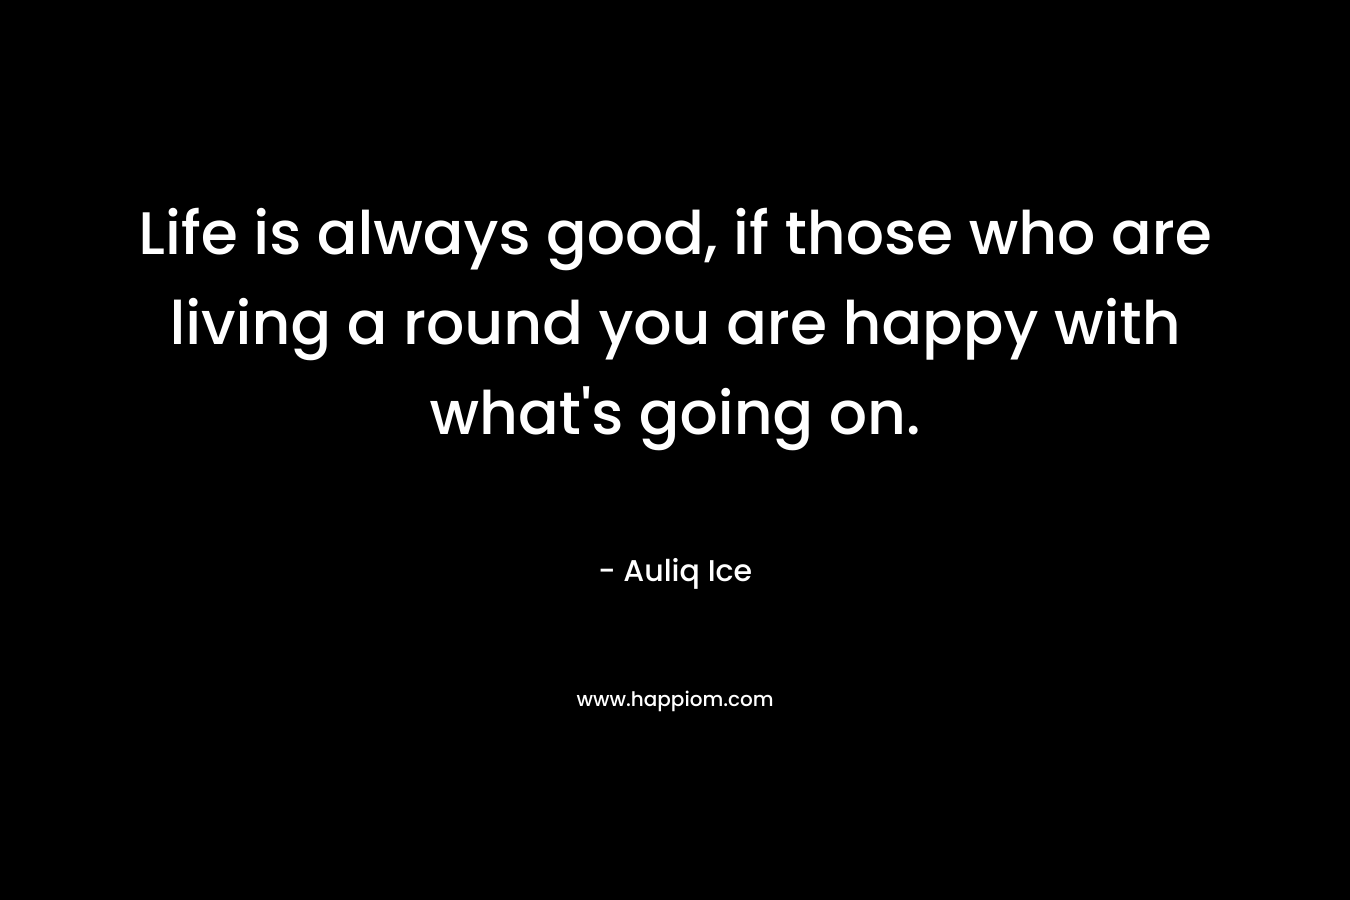 Life is always good, if those who are living a round you are happy with what's going on.